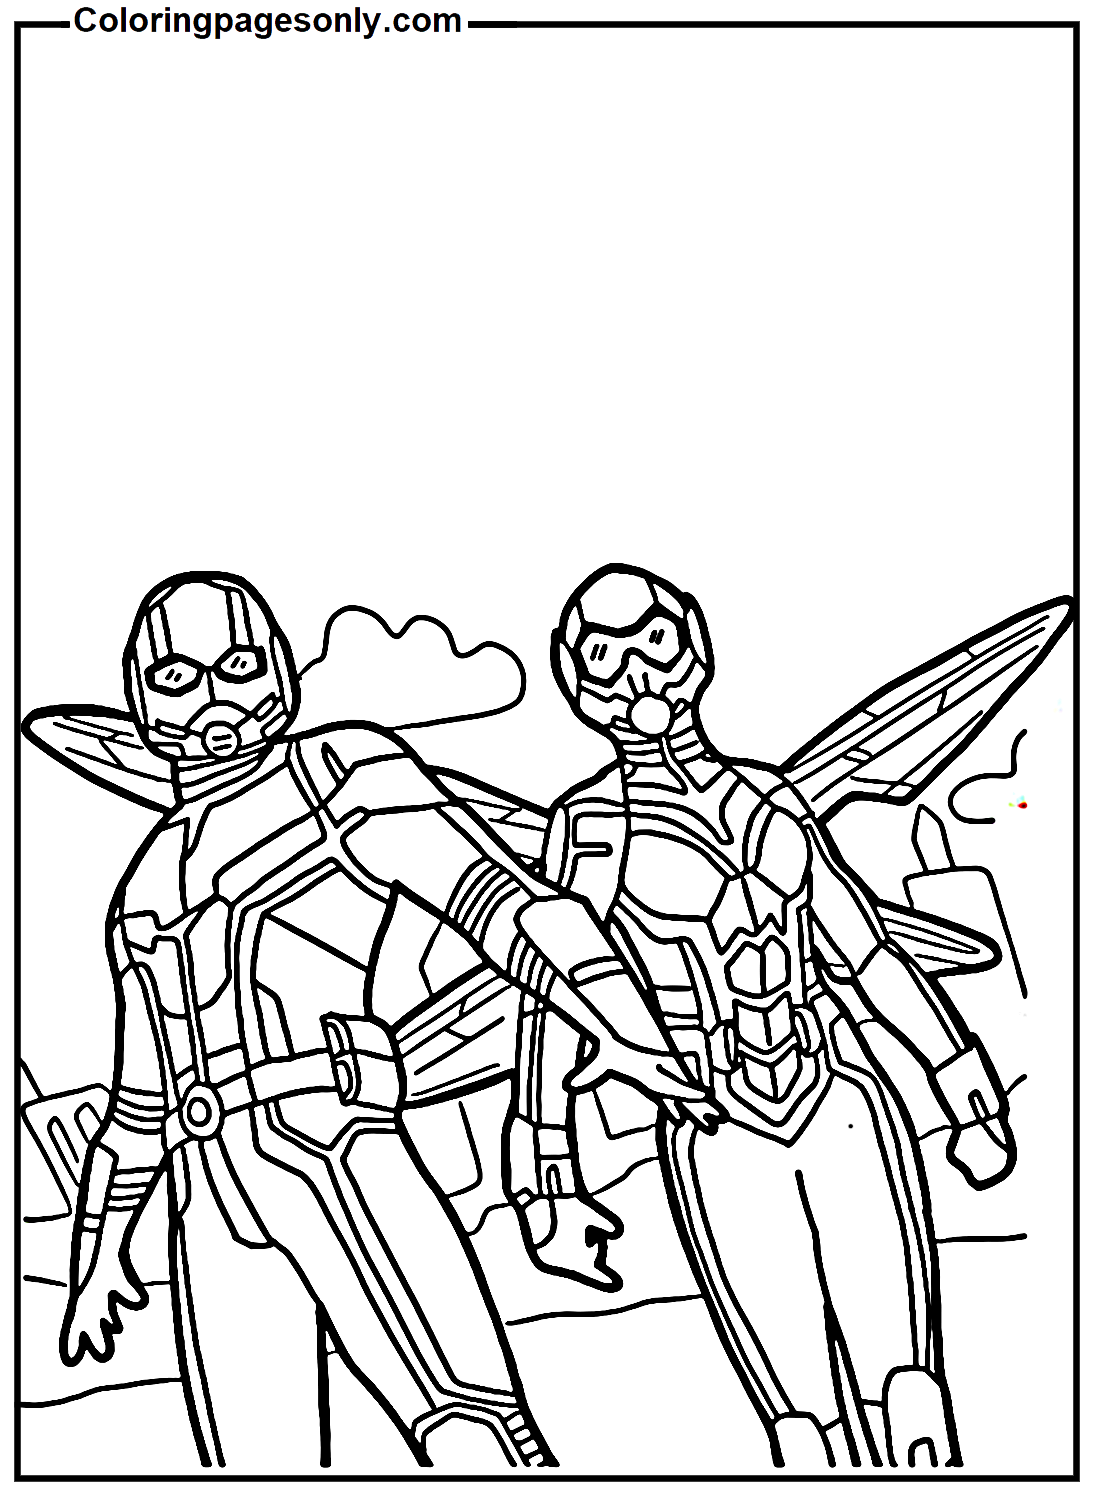 Ant-Man with Wasp Coloring Page